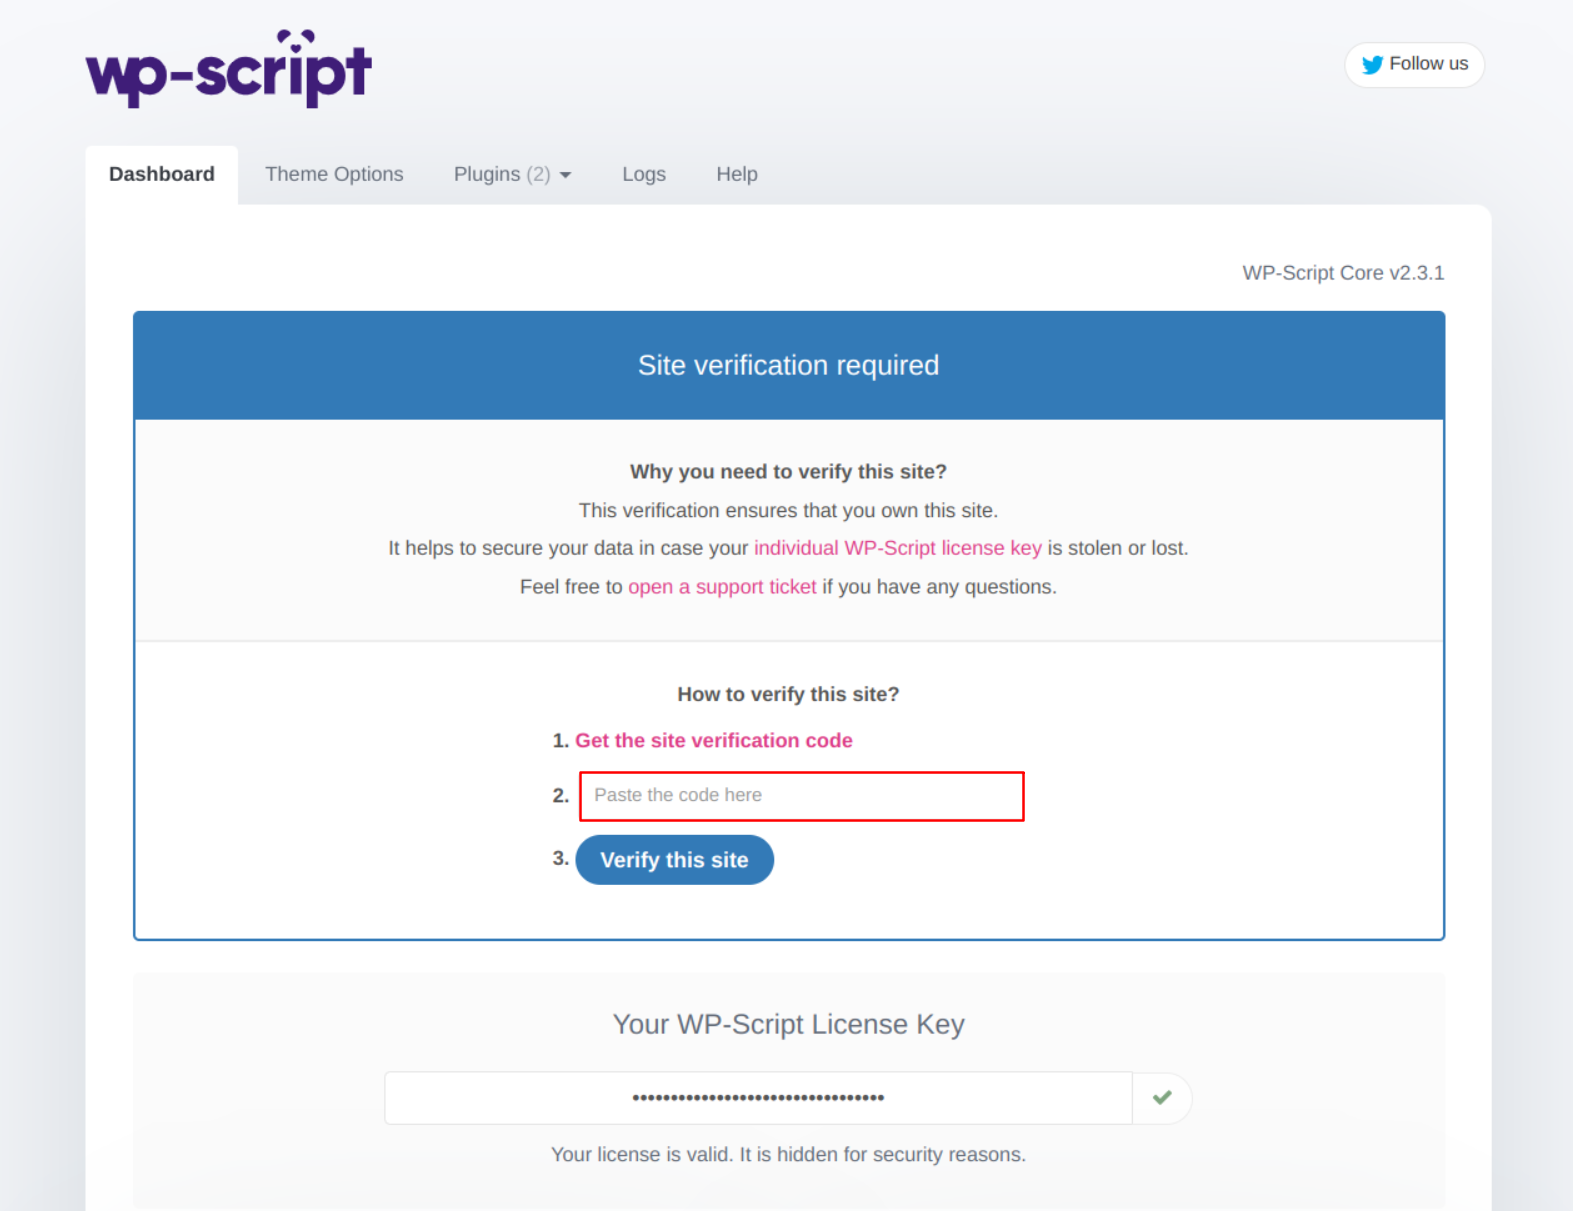 Paste the verification code back in the WP-Script Dashboard on your site and you are done